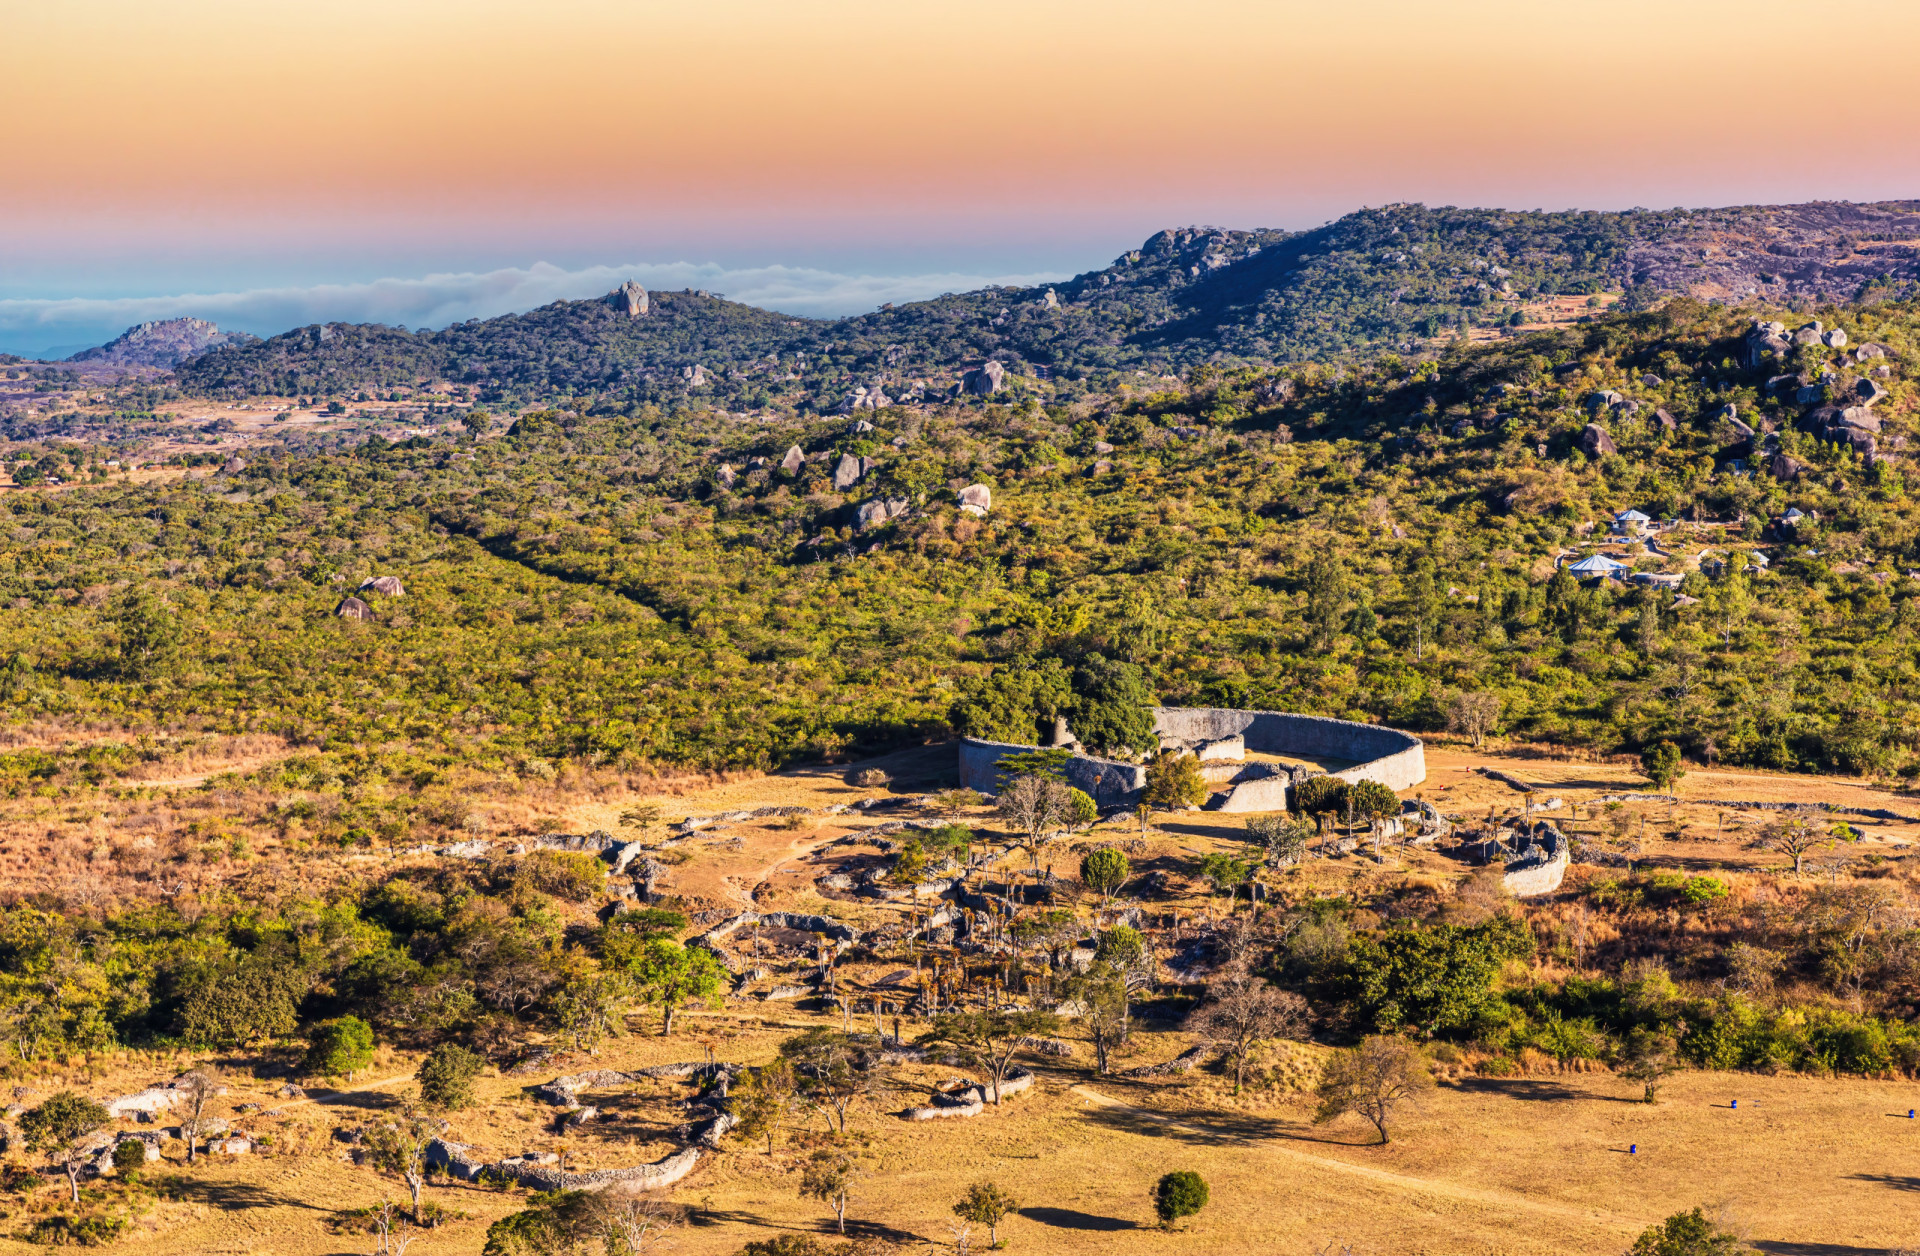 <p>The largest ethnic group in Zimbabwe, the Shona people have many traditional beliefs and a strong history of kingdom-building, which flourished between the 11th and 15th centuries. Some of the ruins of this kingdom can still be seen today.</p><p><a href="https://www.msn.com/en-us/community/channel/vid-7xx8mnucu55yw63we9va2gwr7uihbxwc68fxqp25x6tg4ftibpra?cvid=94631541bc0f4f89bfd59158d696ad7e">Follow us and access great exclusive content every day</a></p>